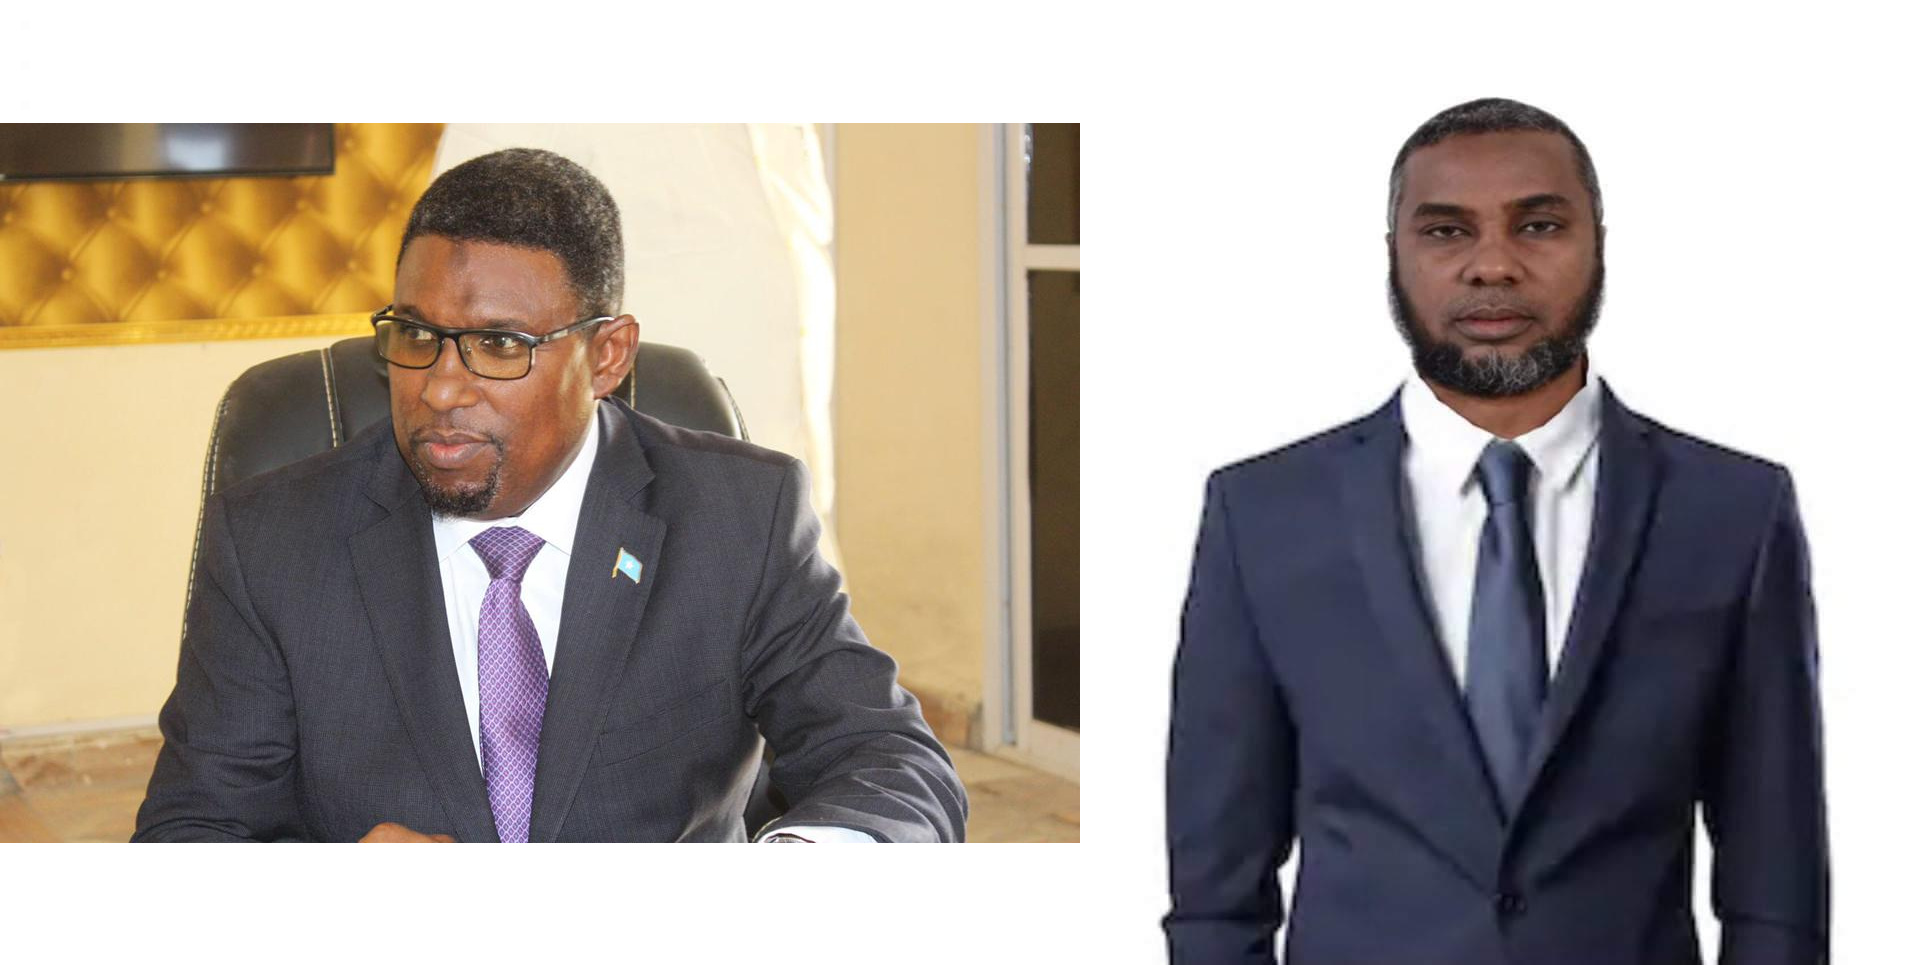 Minister of petroleum and his clan associate accused of grabbing  parliamentary seats from minority clans in Somalia